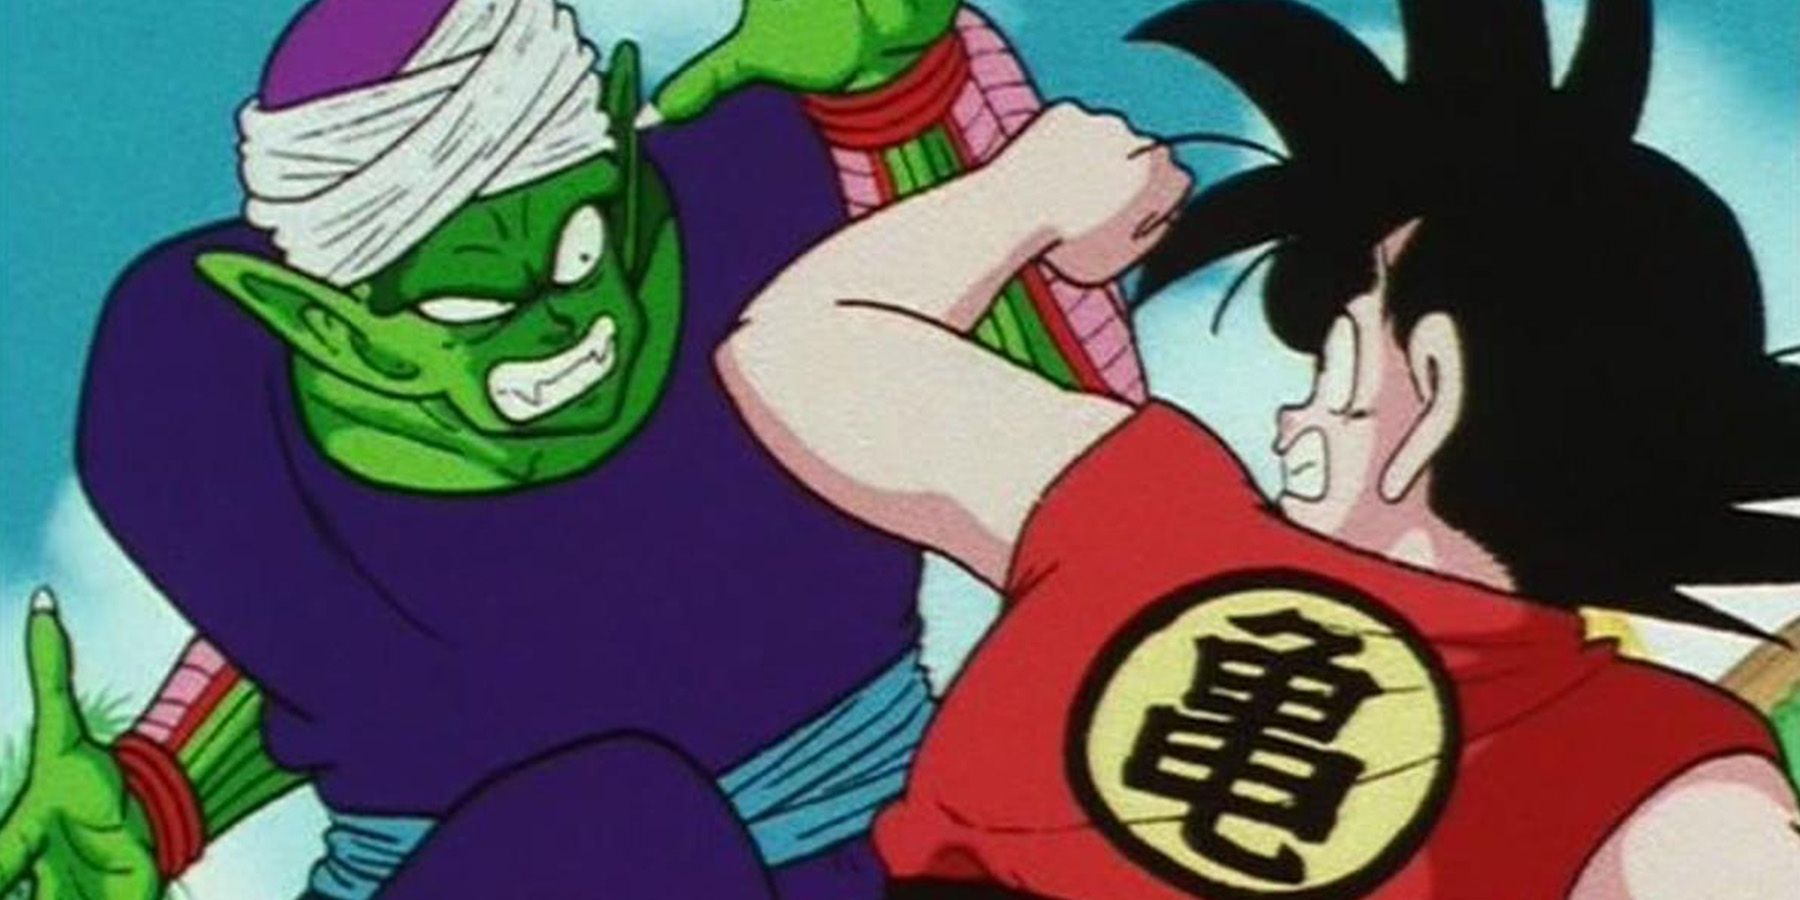 Piccolo and Goku block each other's hit in the early stages of their World Martial Arts Tournament fight in Dragon Ball